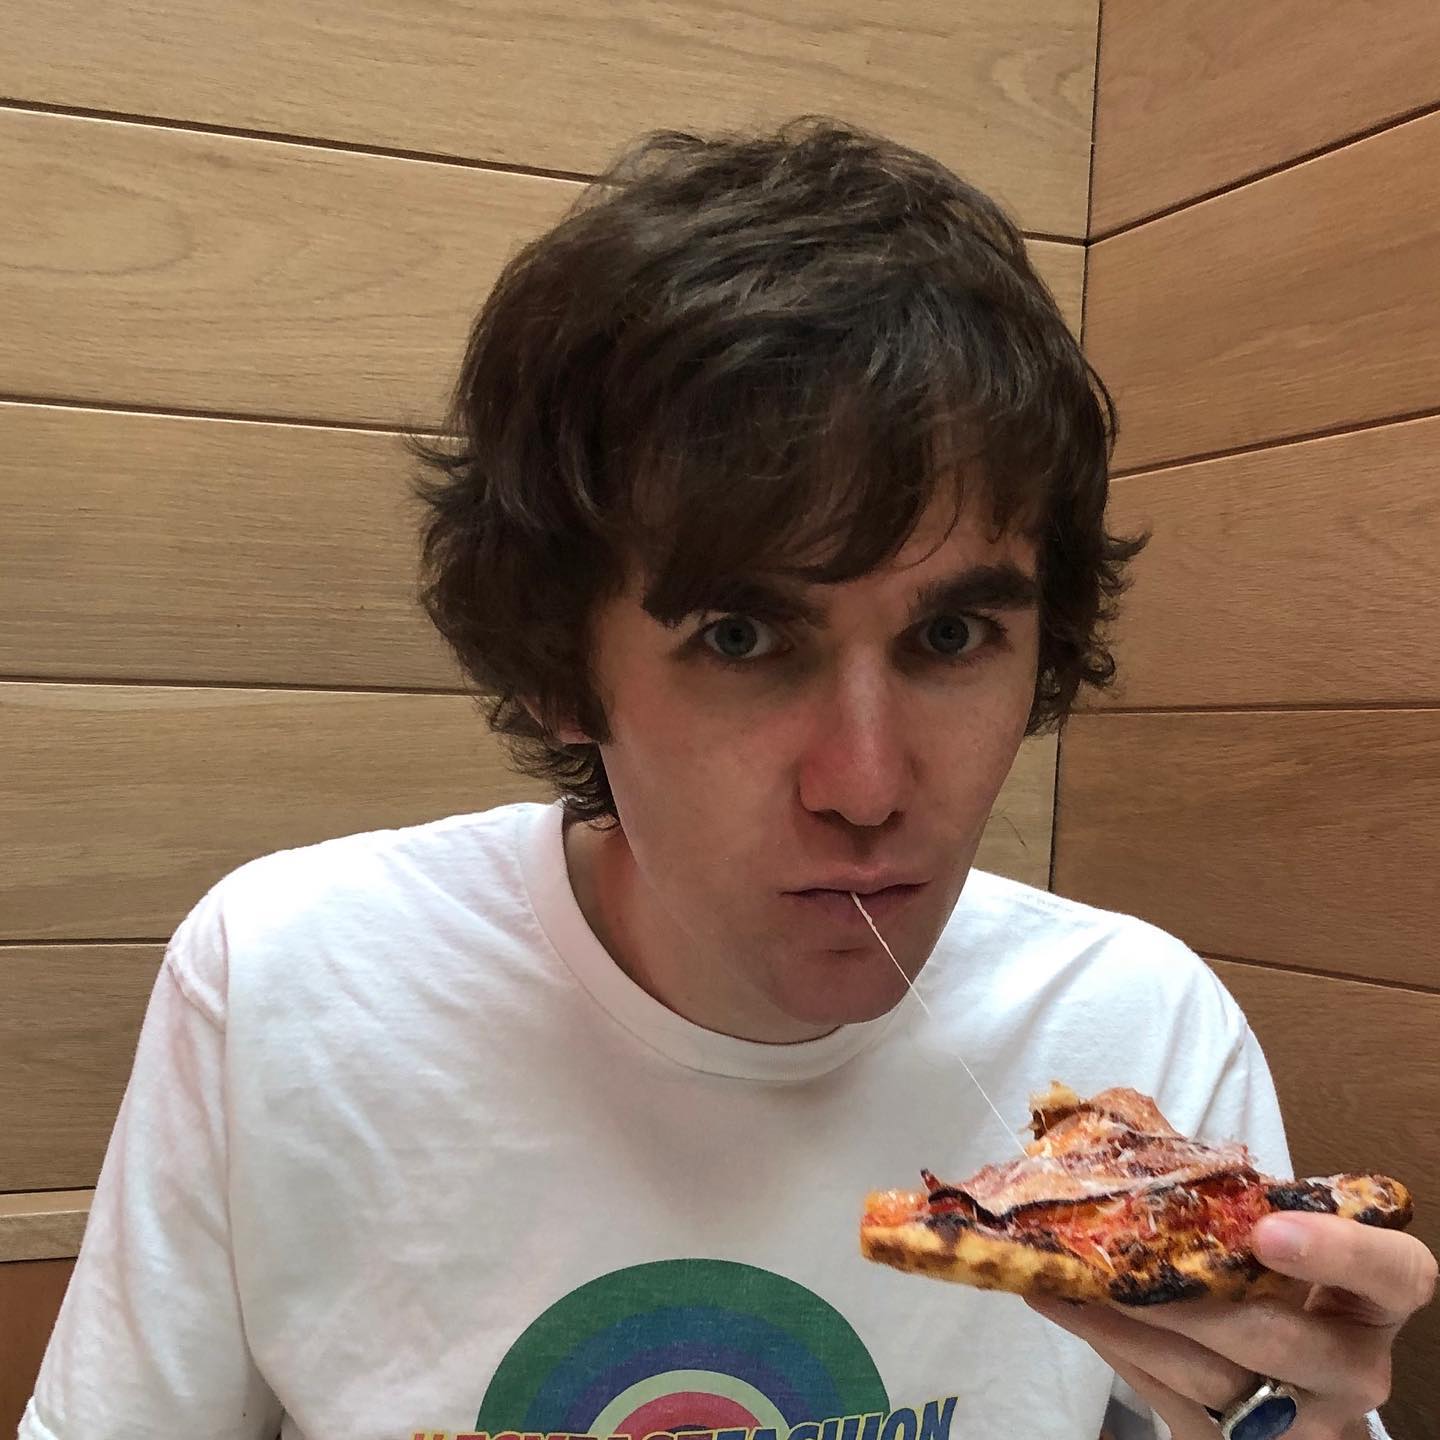 Tom Cridland Samples Pizza At Dominos For The Video And Song "Domino's At Midnight."